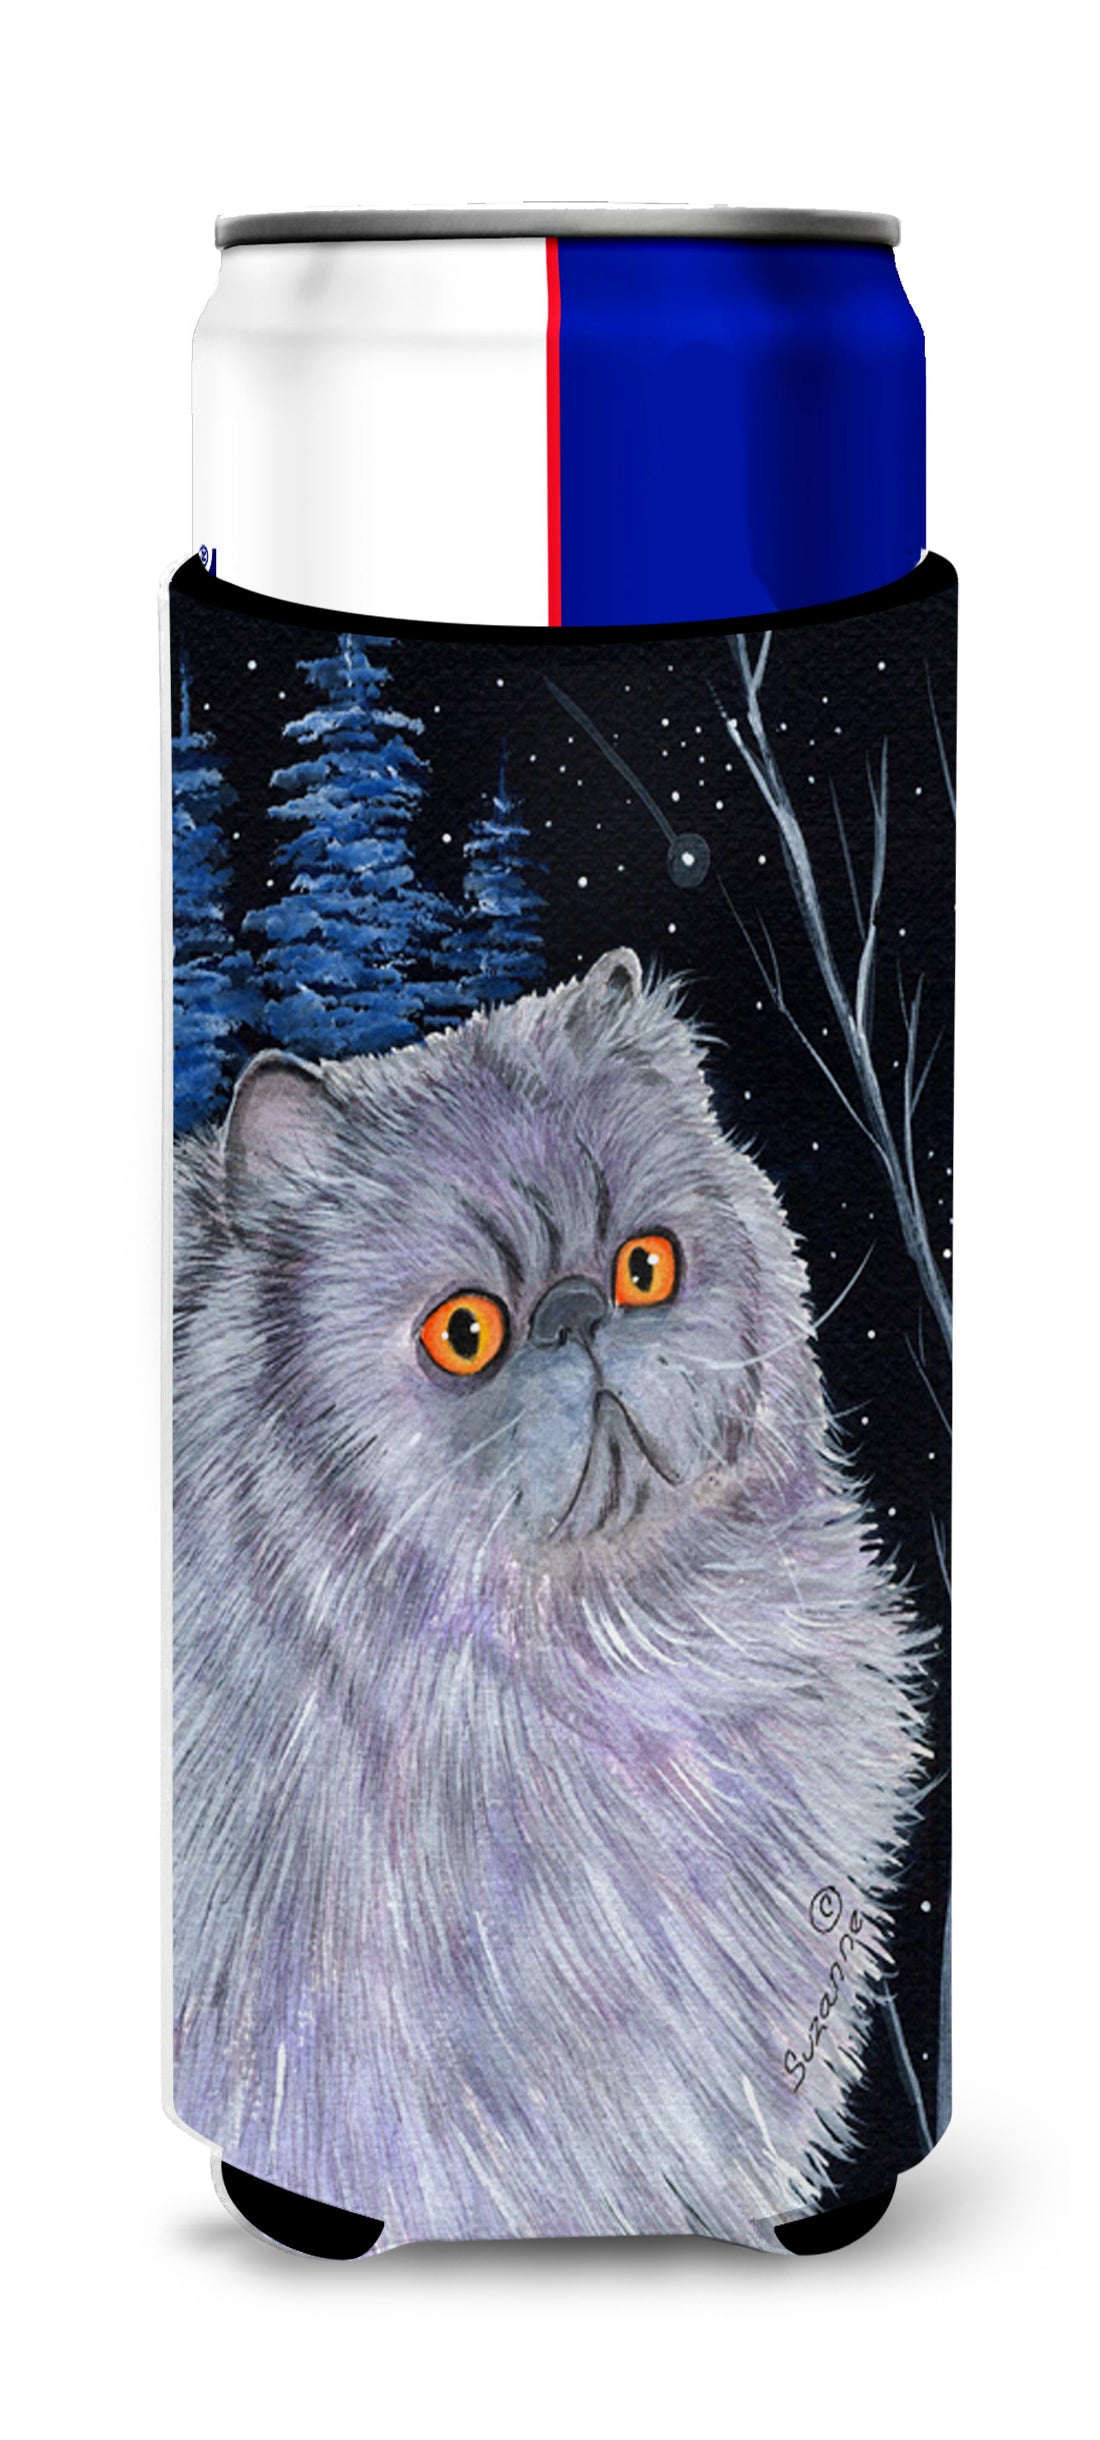 Starry Night Cat - Persian Ultra Beverage Insulators for slim cans SS8402MUK